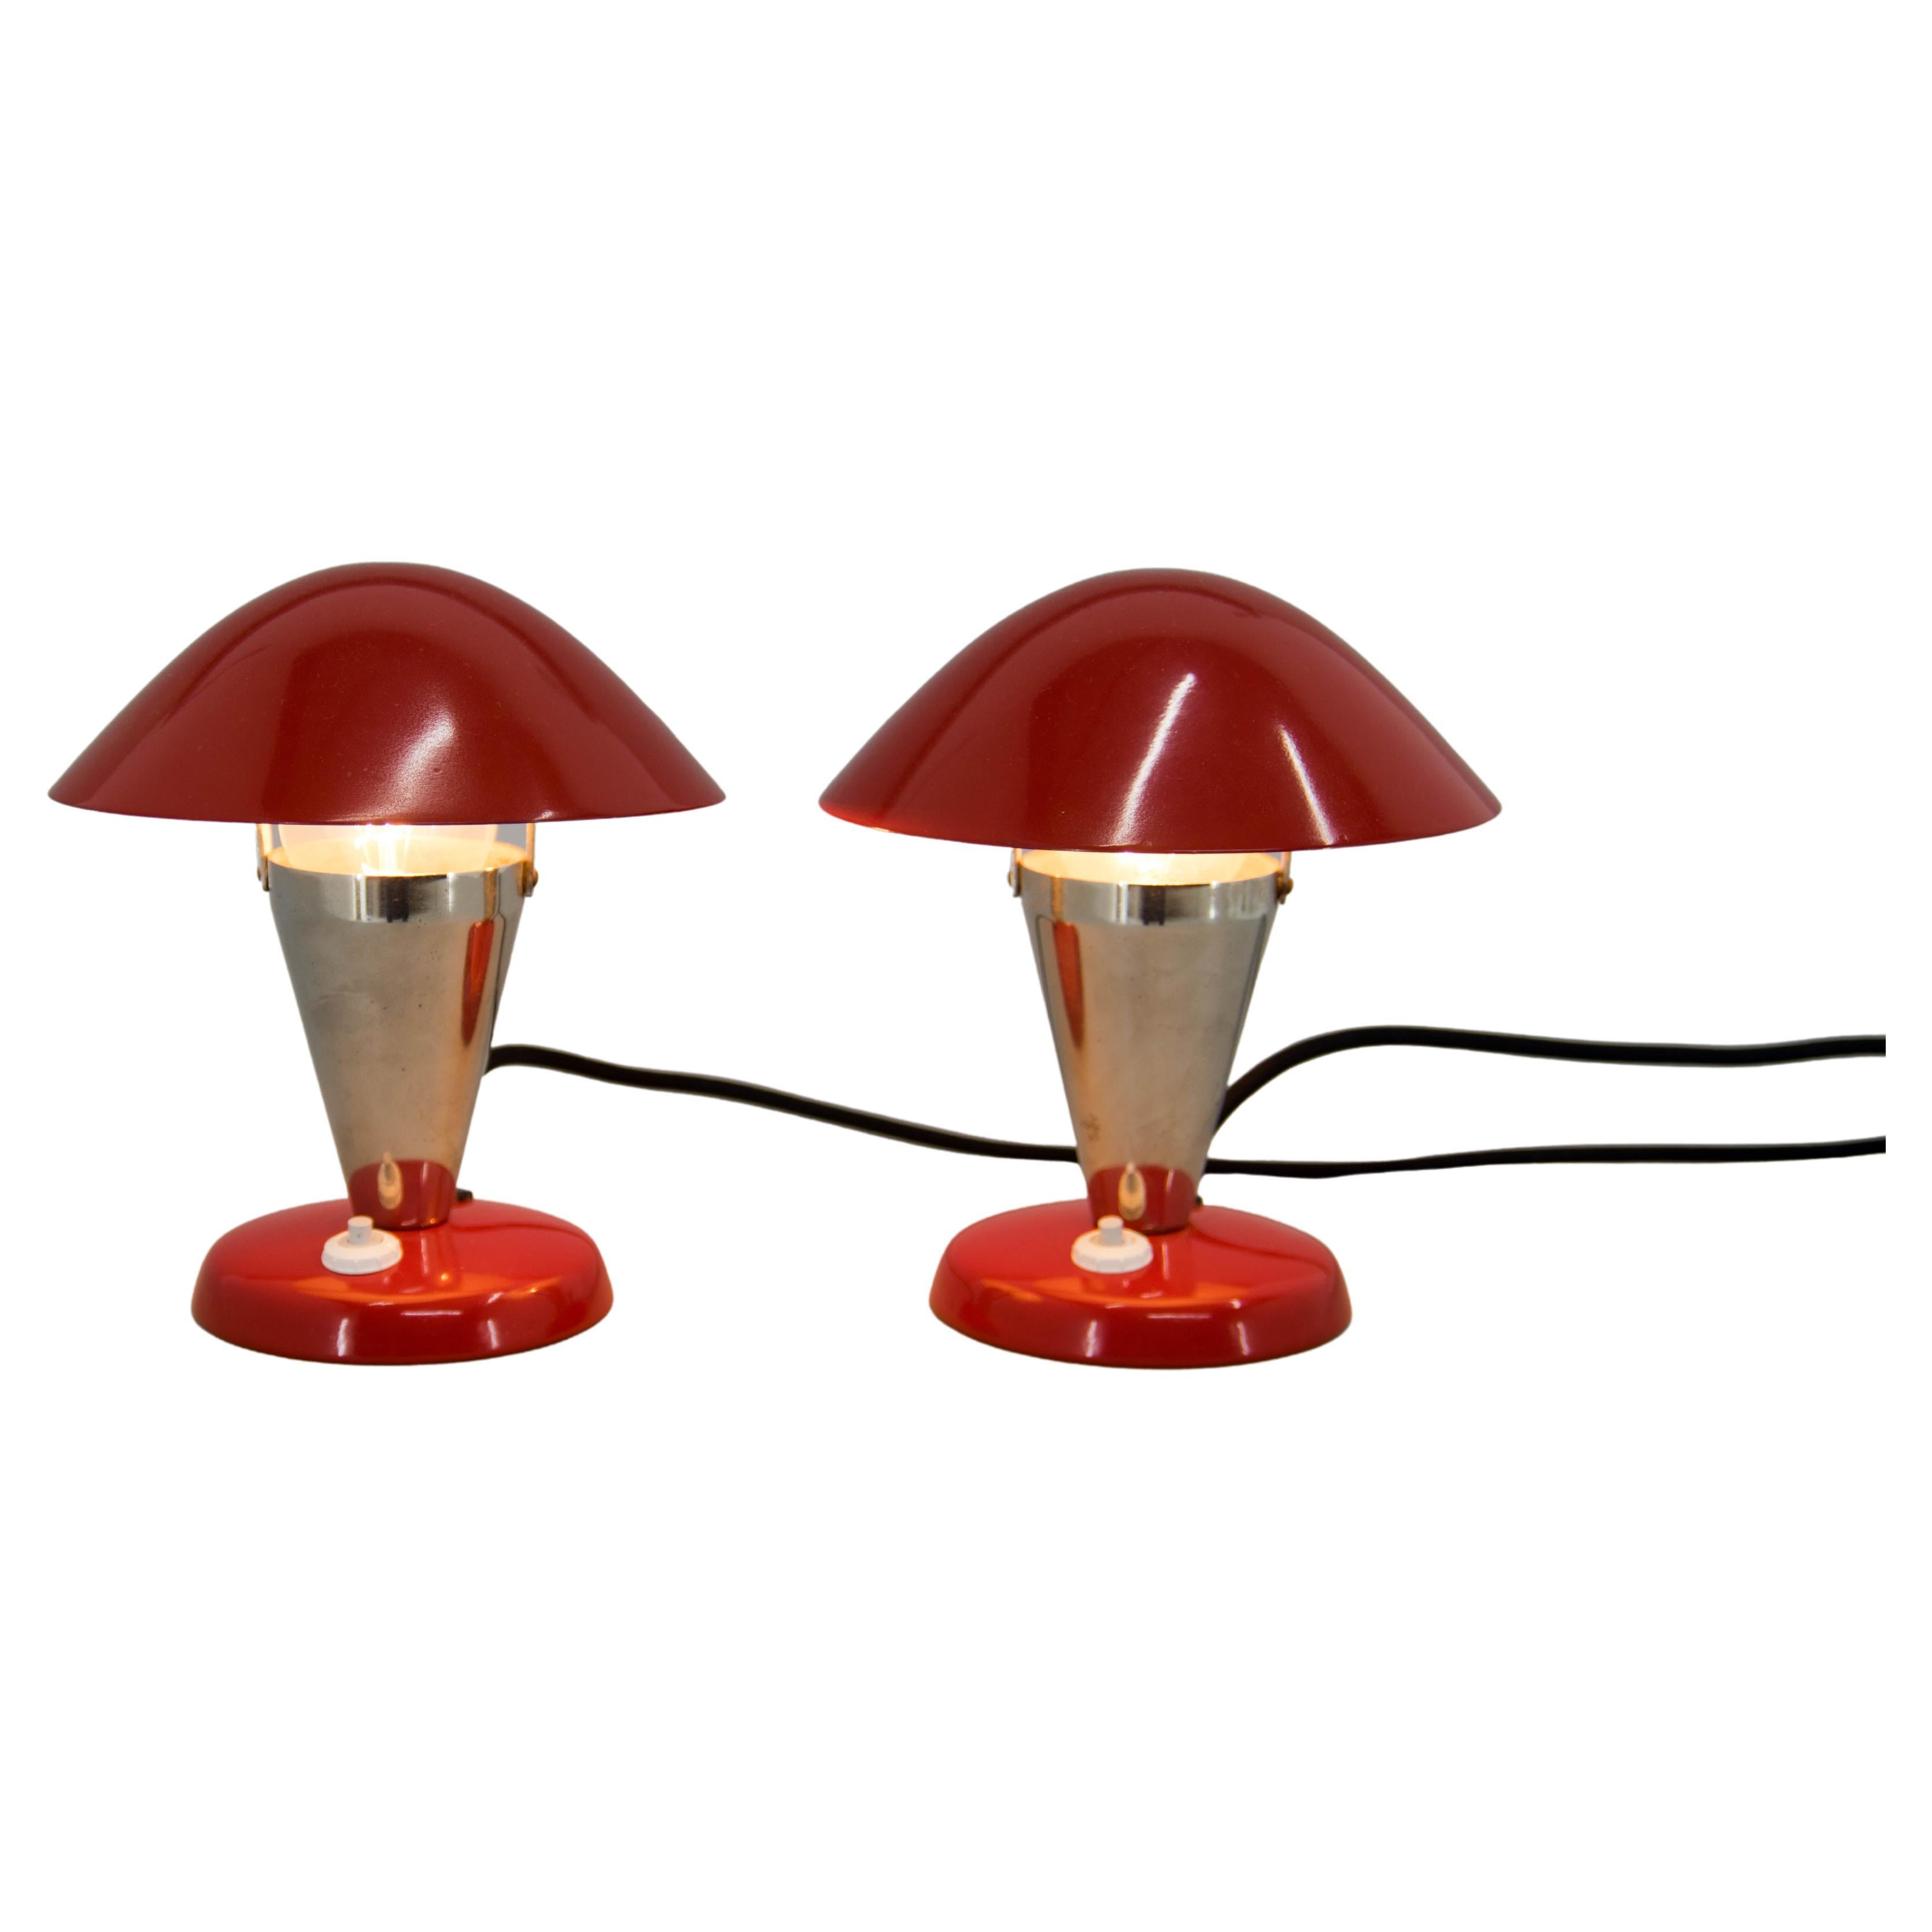 Pair of Bauhaus Bedside Lamps with Flexible Shade, 1930s, Restored For Sale